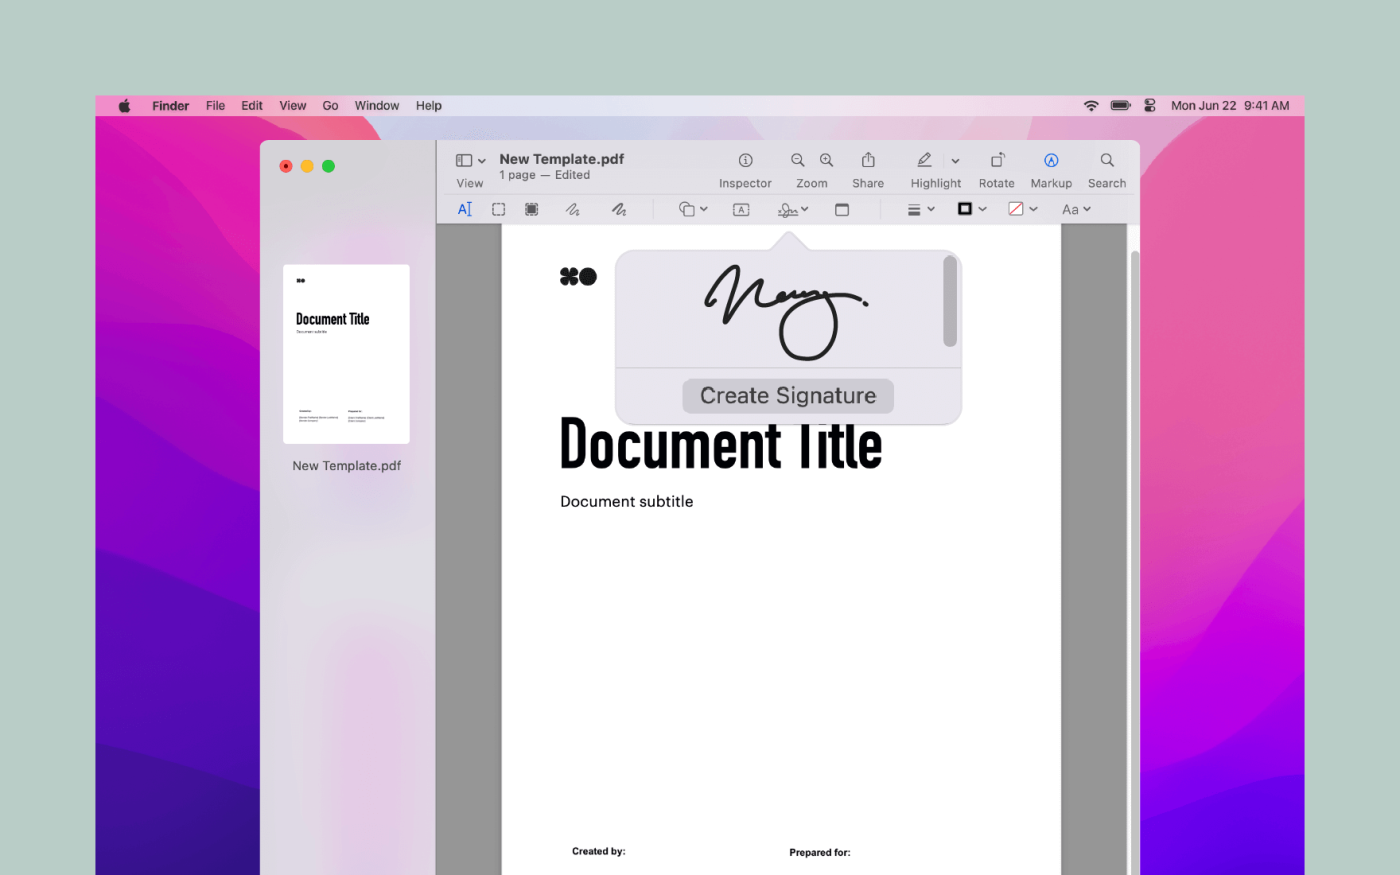 Once you are happy with the signature, click Done, select the signature you wish to use and drag it to the appropriate area in the document and resize it if necessary